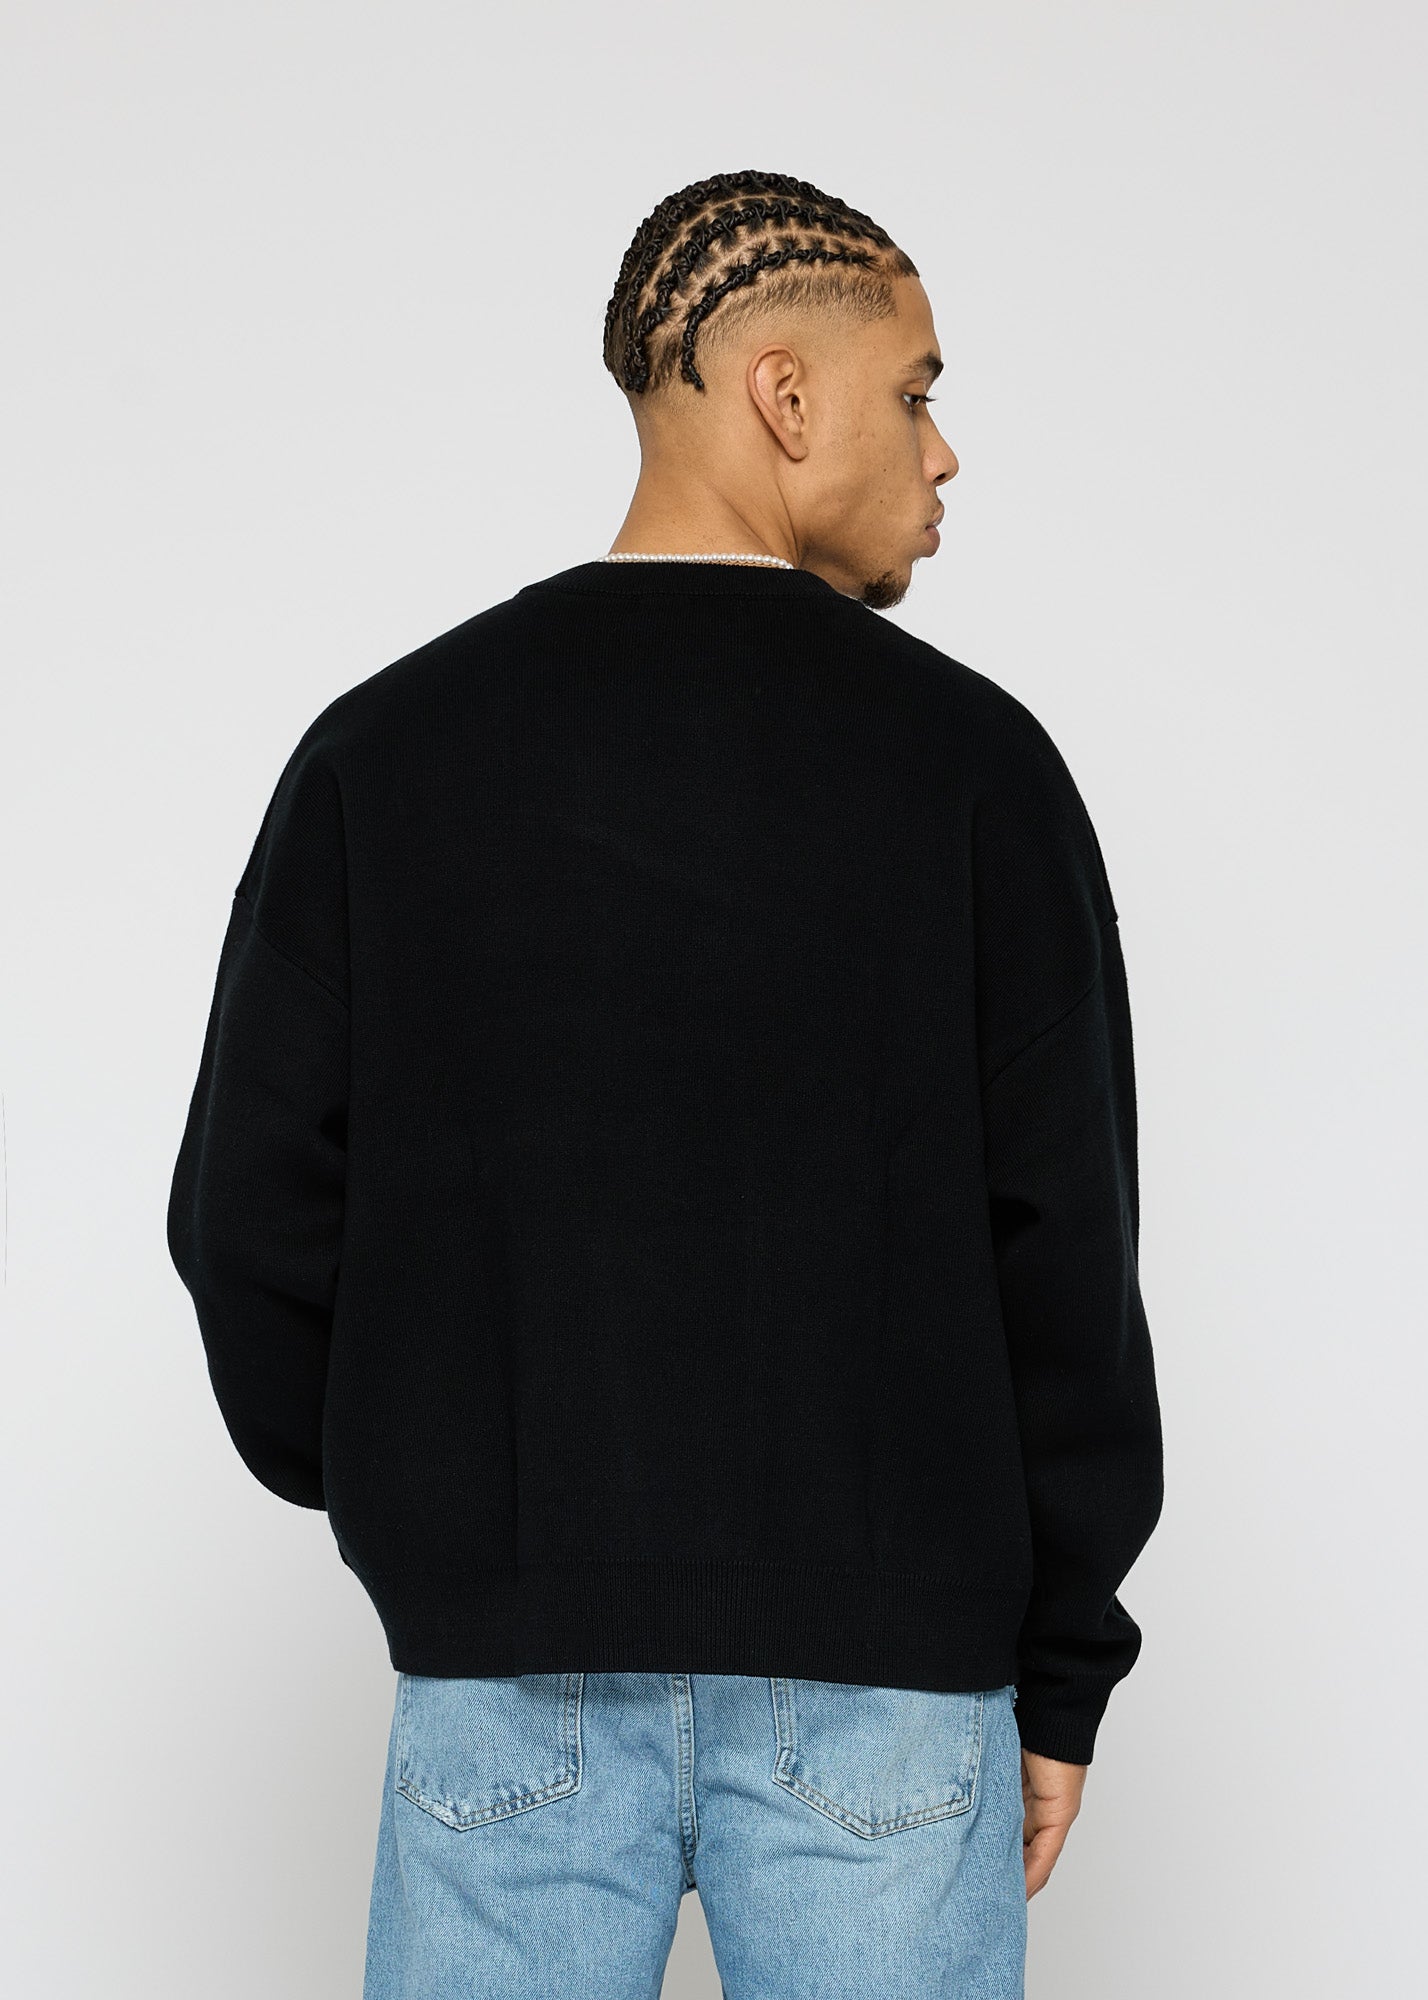 Mythic Knit Sweater